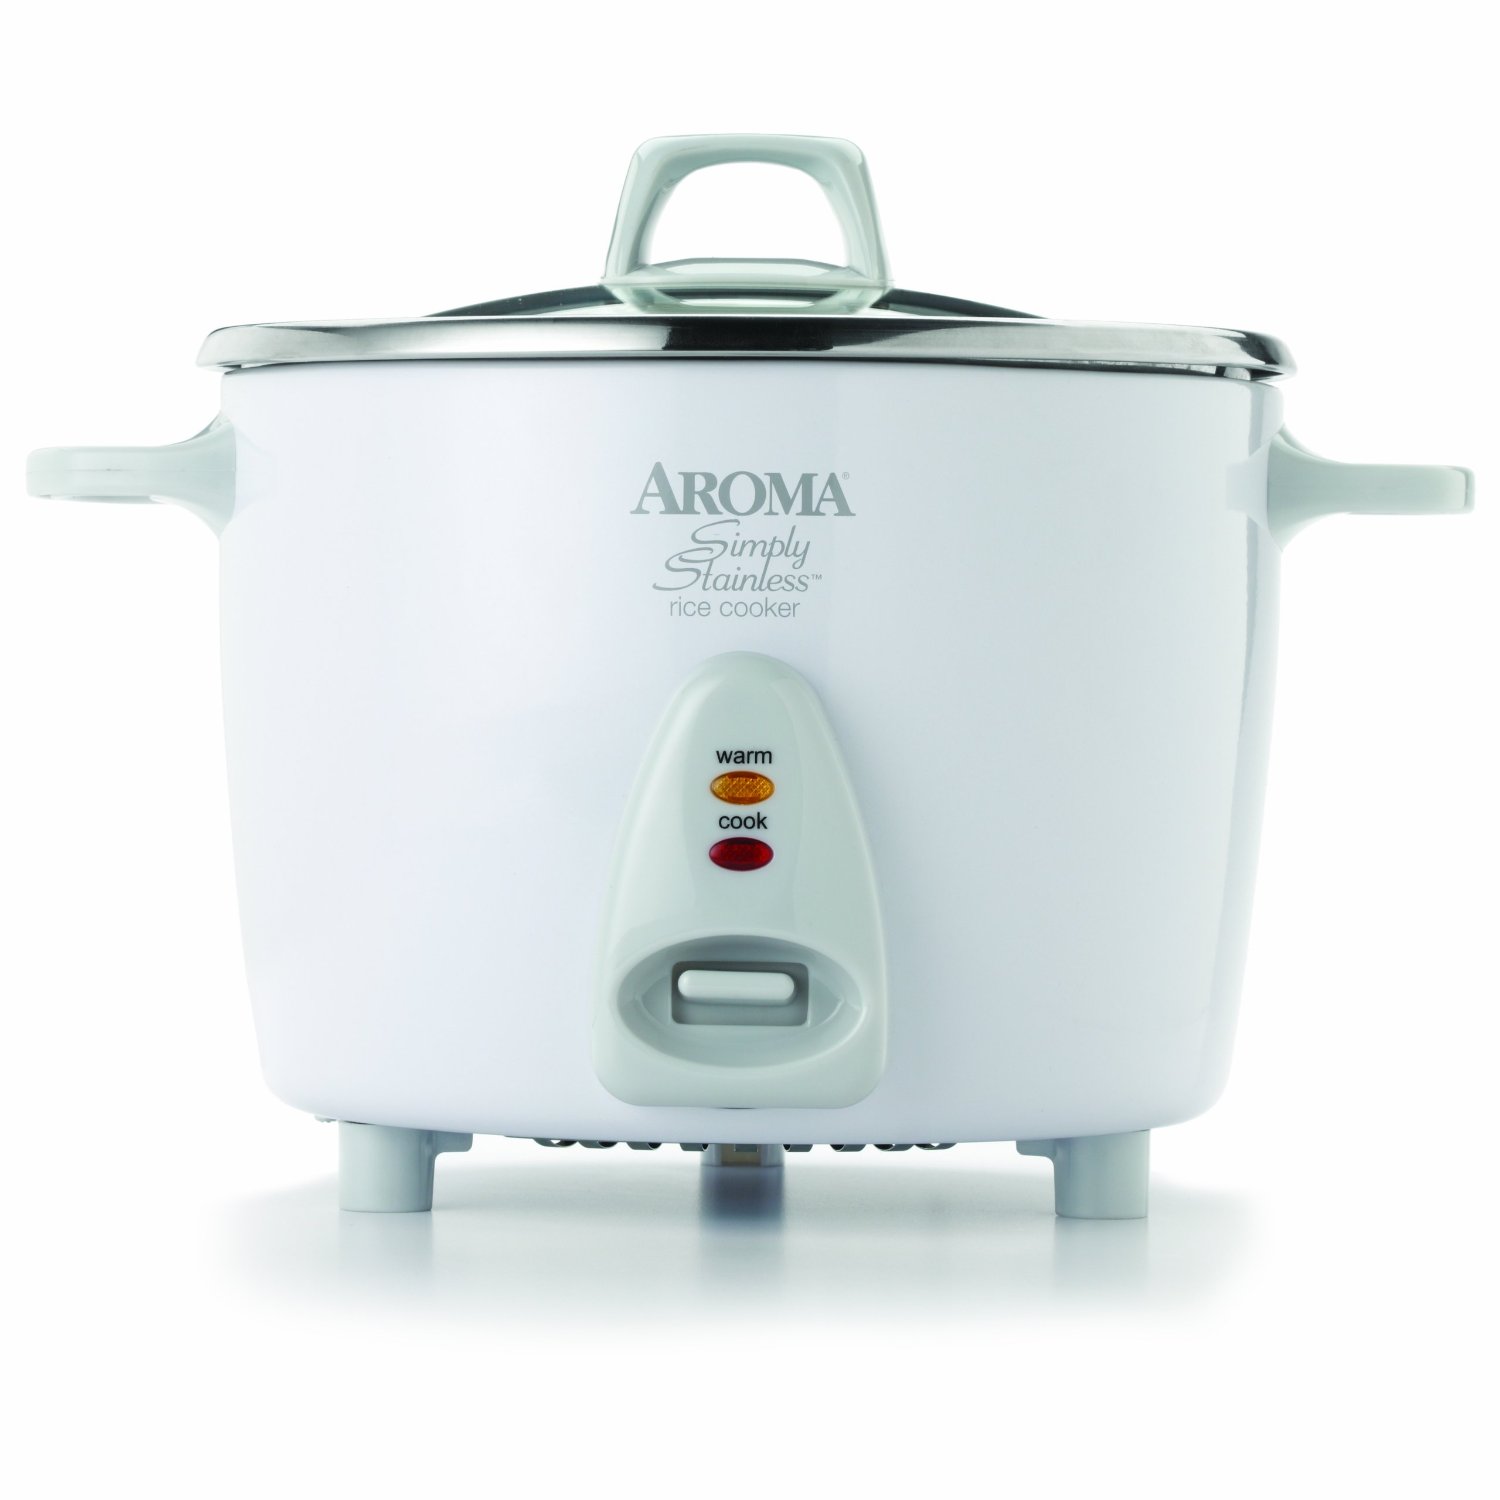 Rice Cooker Reviews - Finding The Best